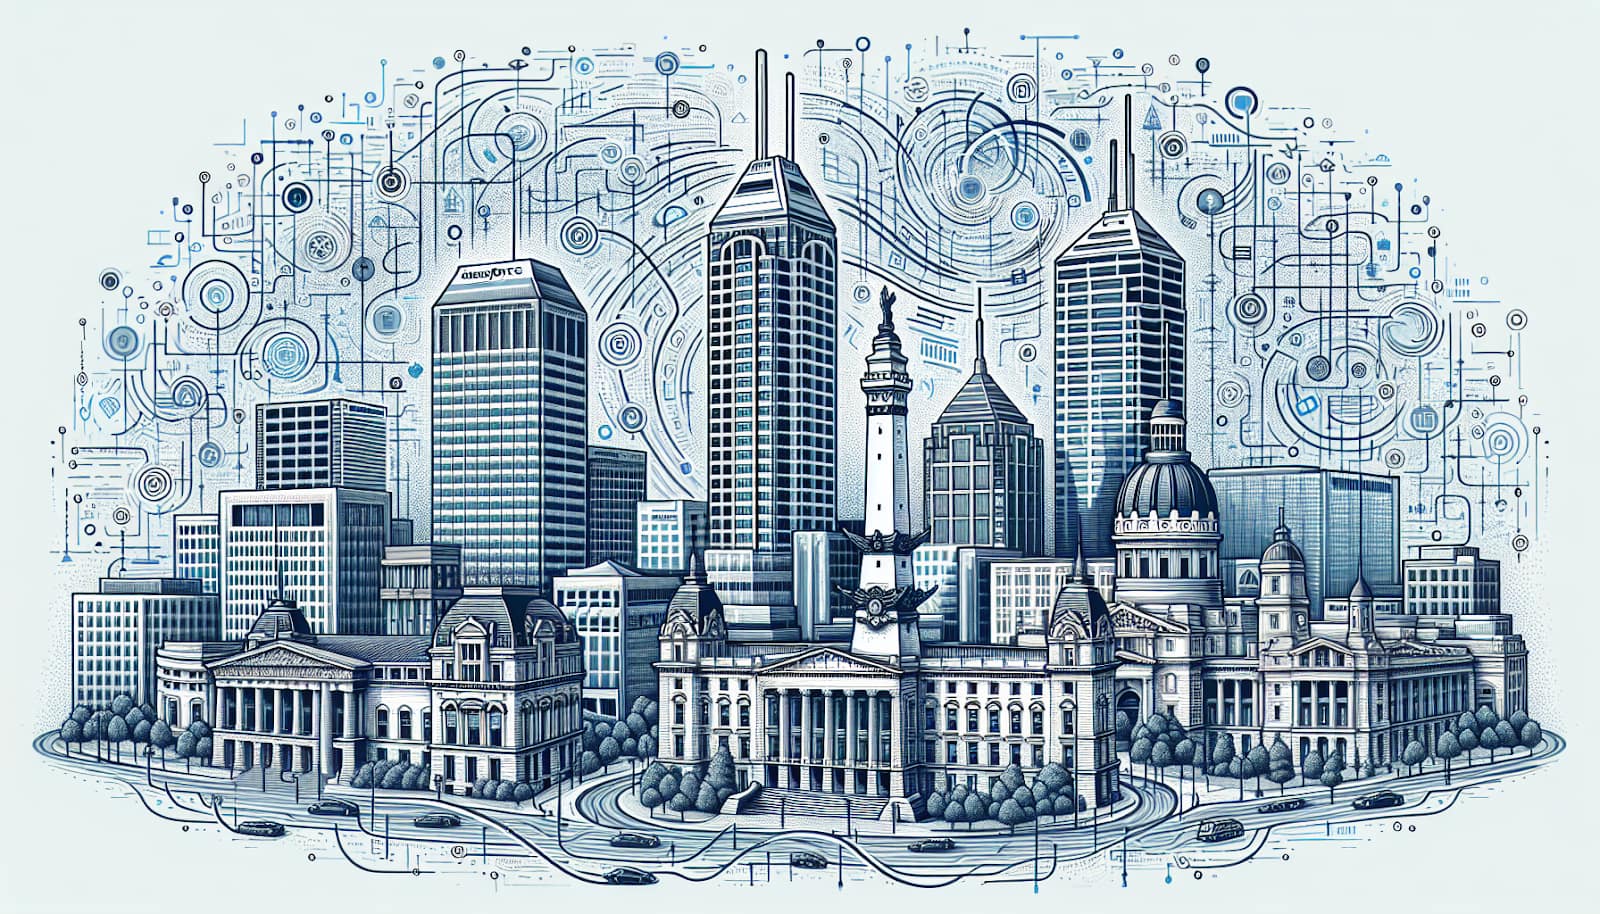 Illustration of Indianapolis skyline with search engine optimization keywords in the background